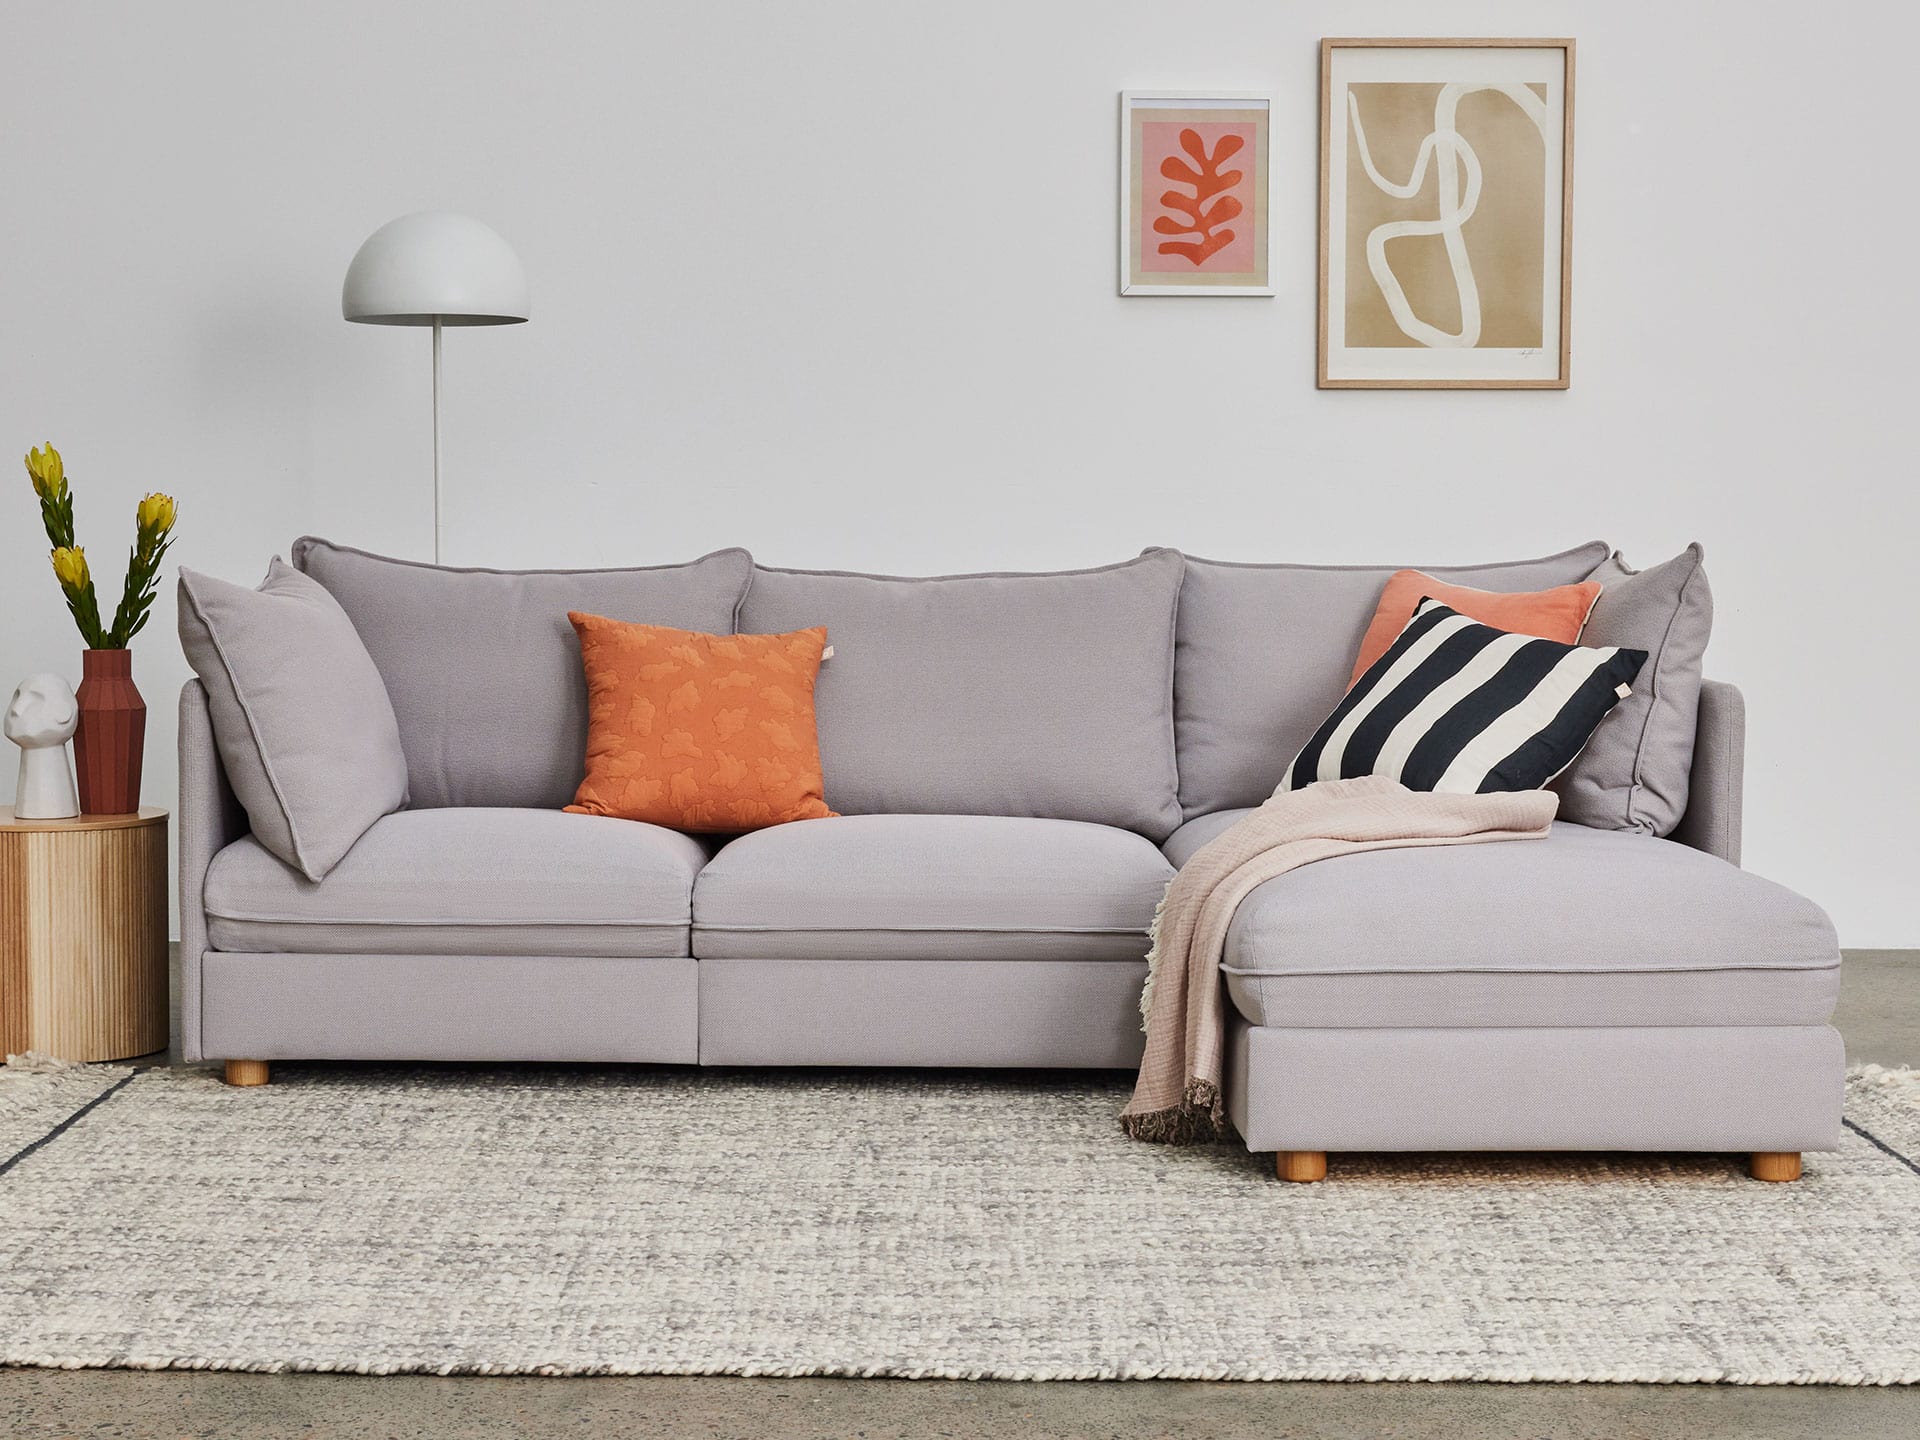 The Getaway Sofa in Choppy Waves is among the must have features in a new home